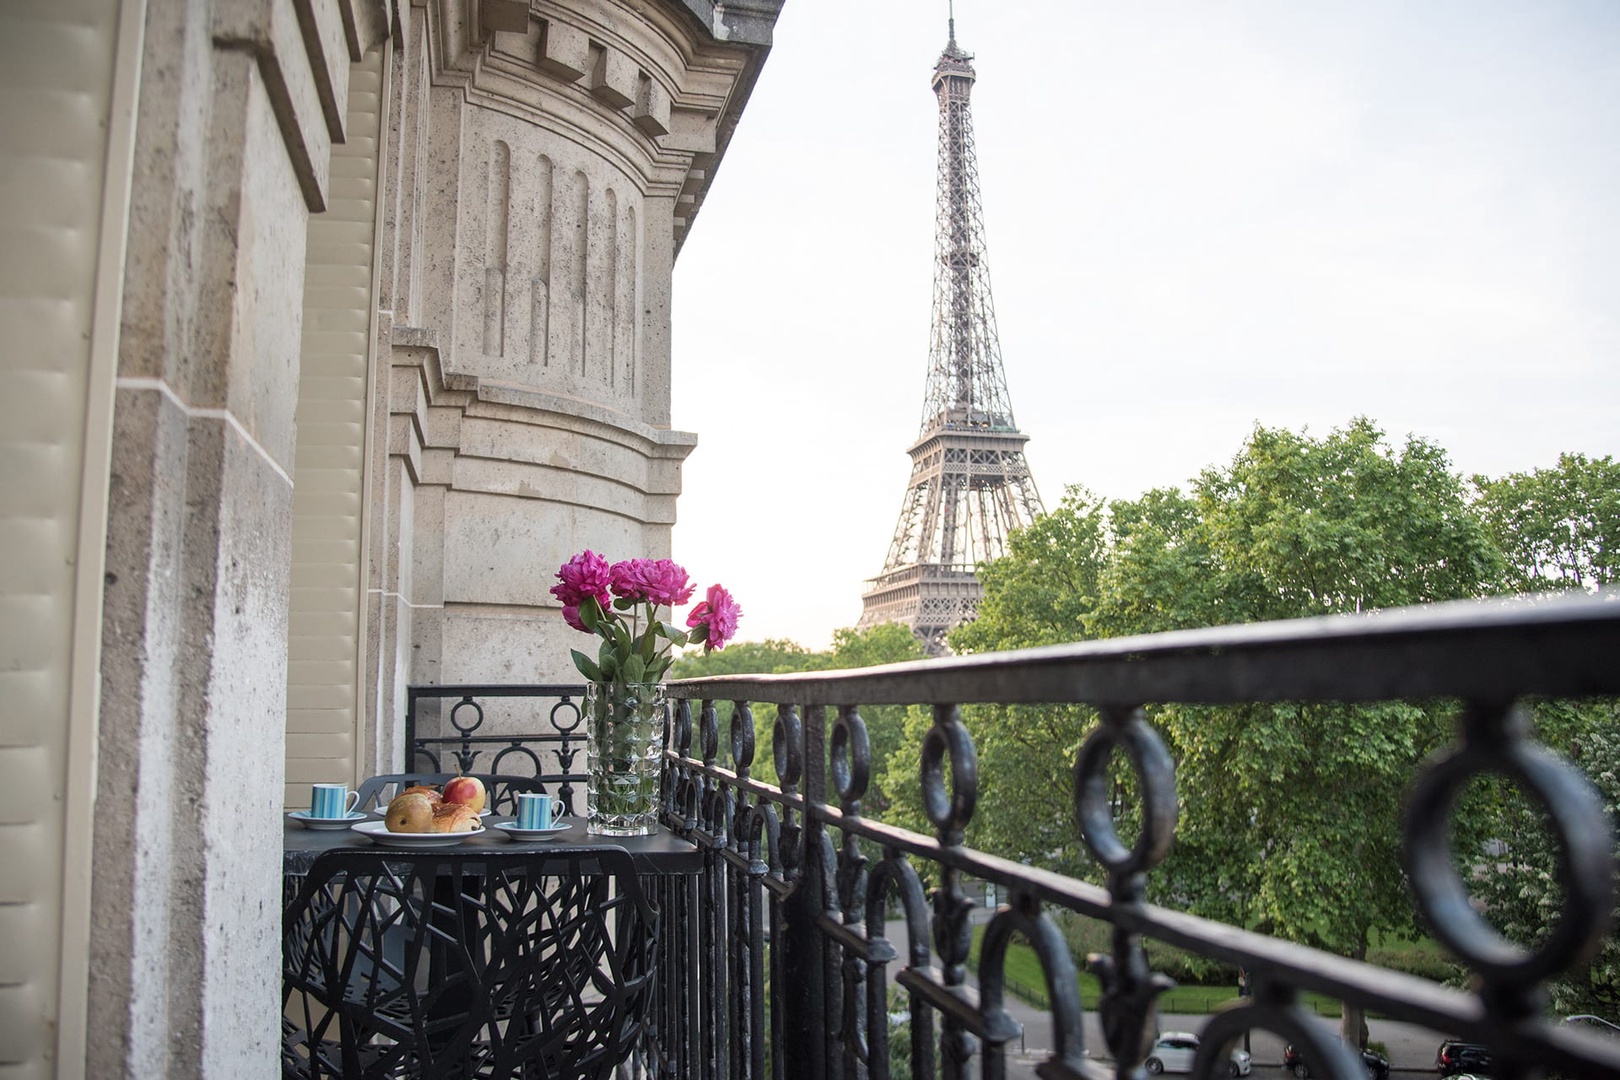 Welcome to the luxurious Chatillon with incredible Eiffel Tower views!